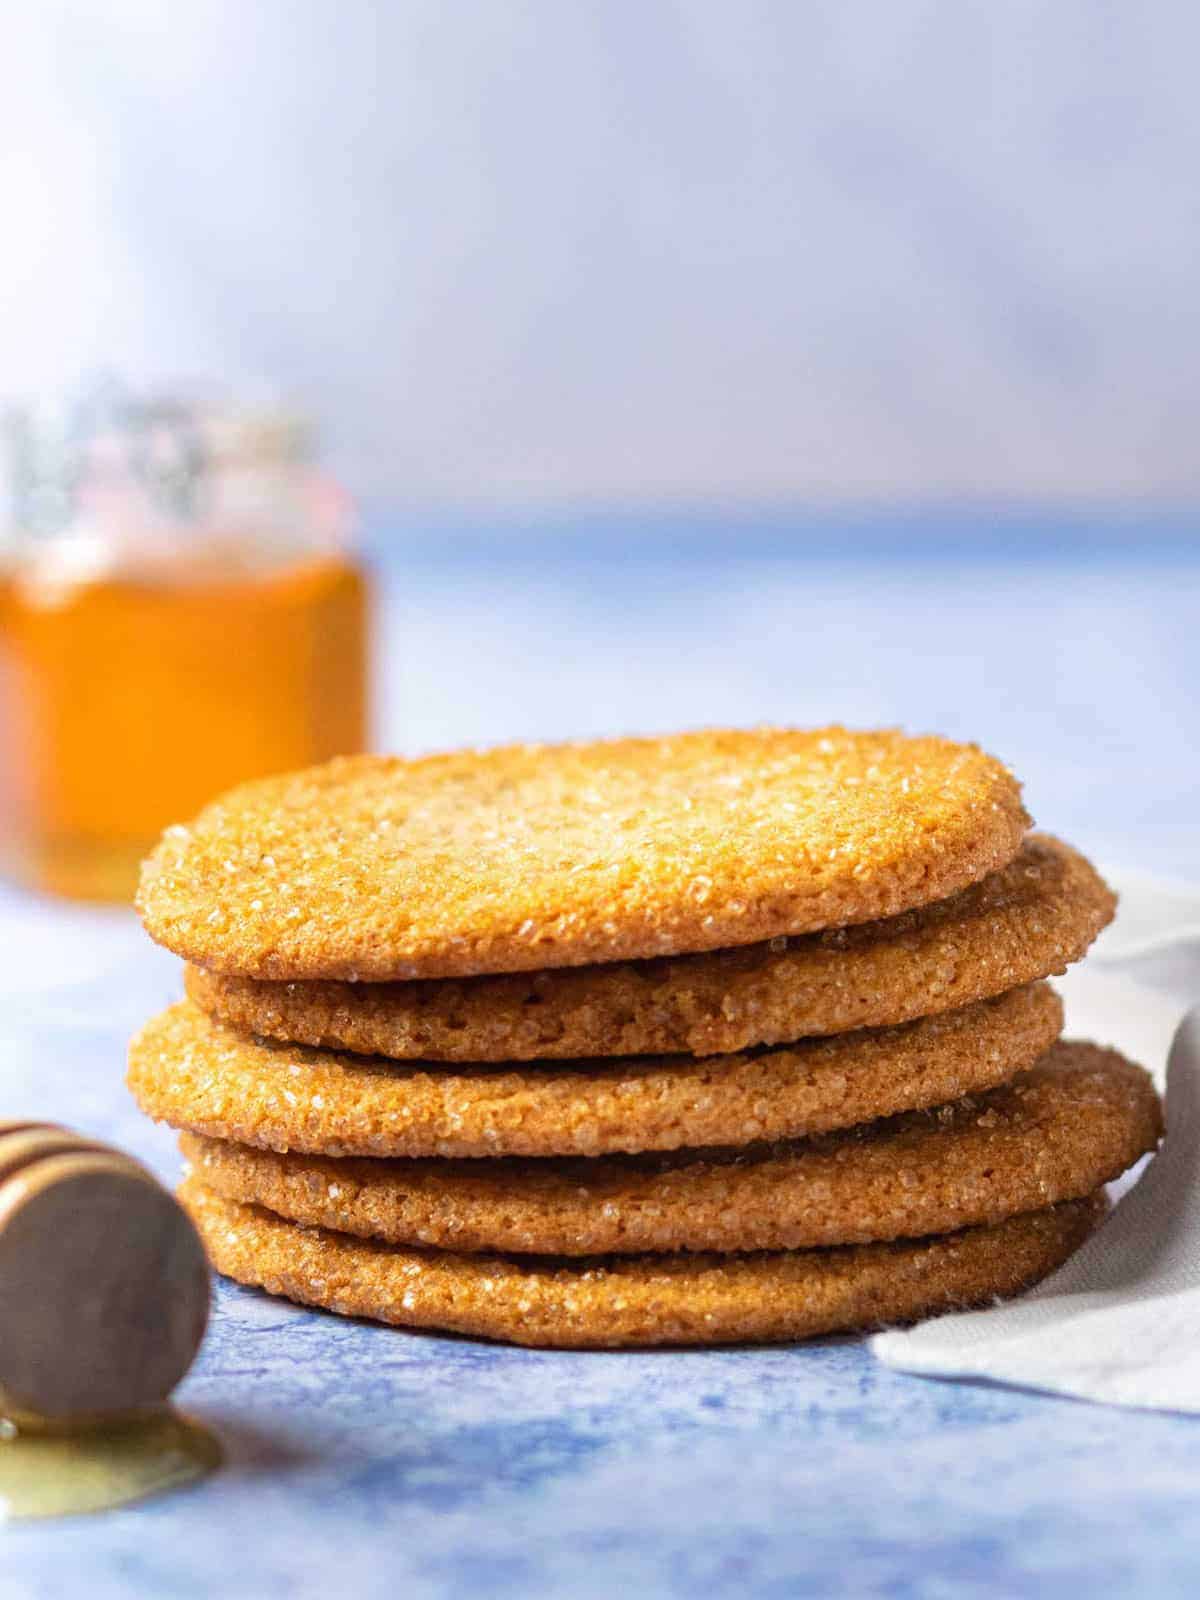 A stack of unique cookies next to a bottle of honey.